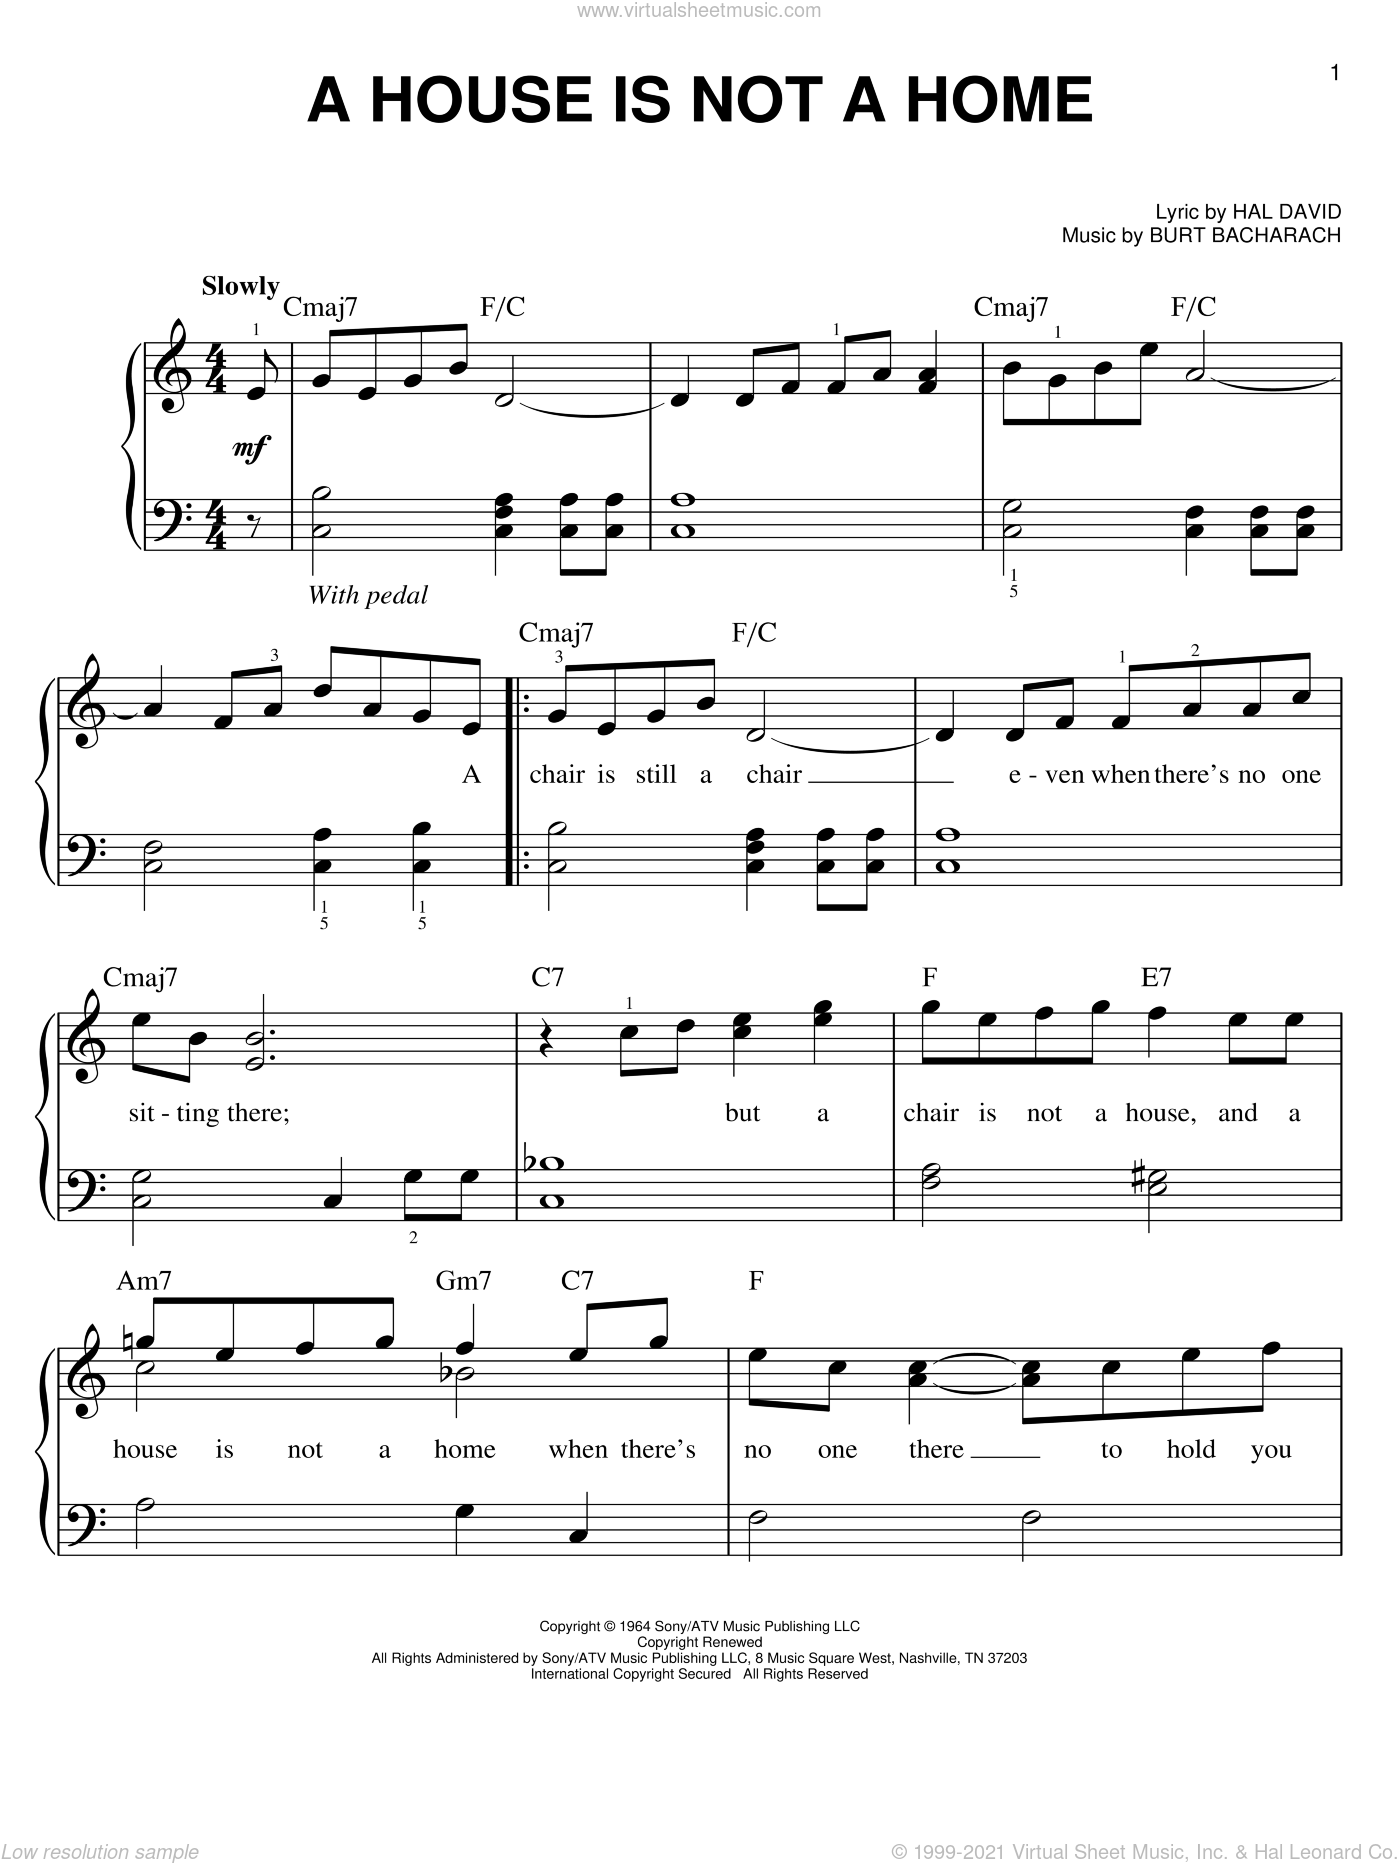 A House Is Not A Home Sheet Music Pdf Free Homelooker